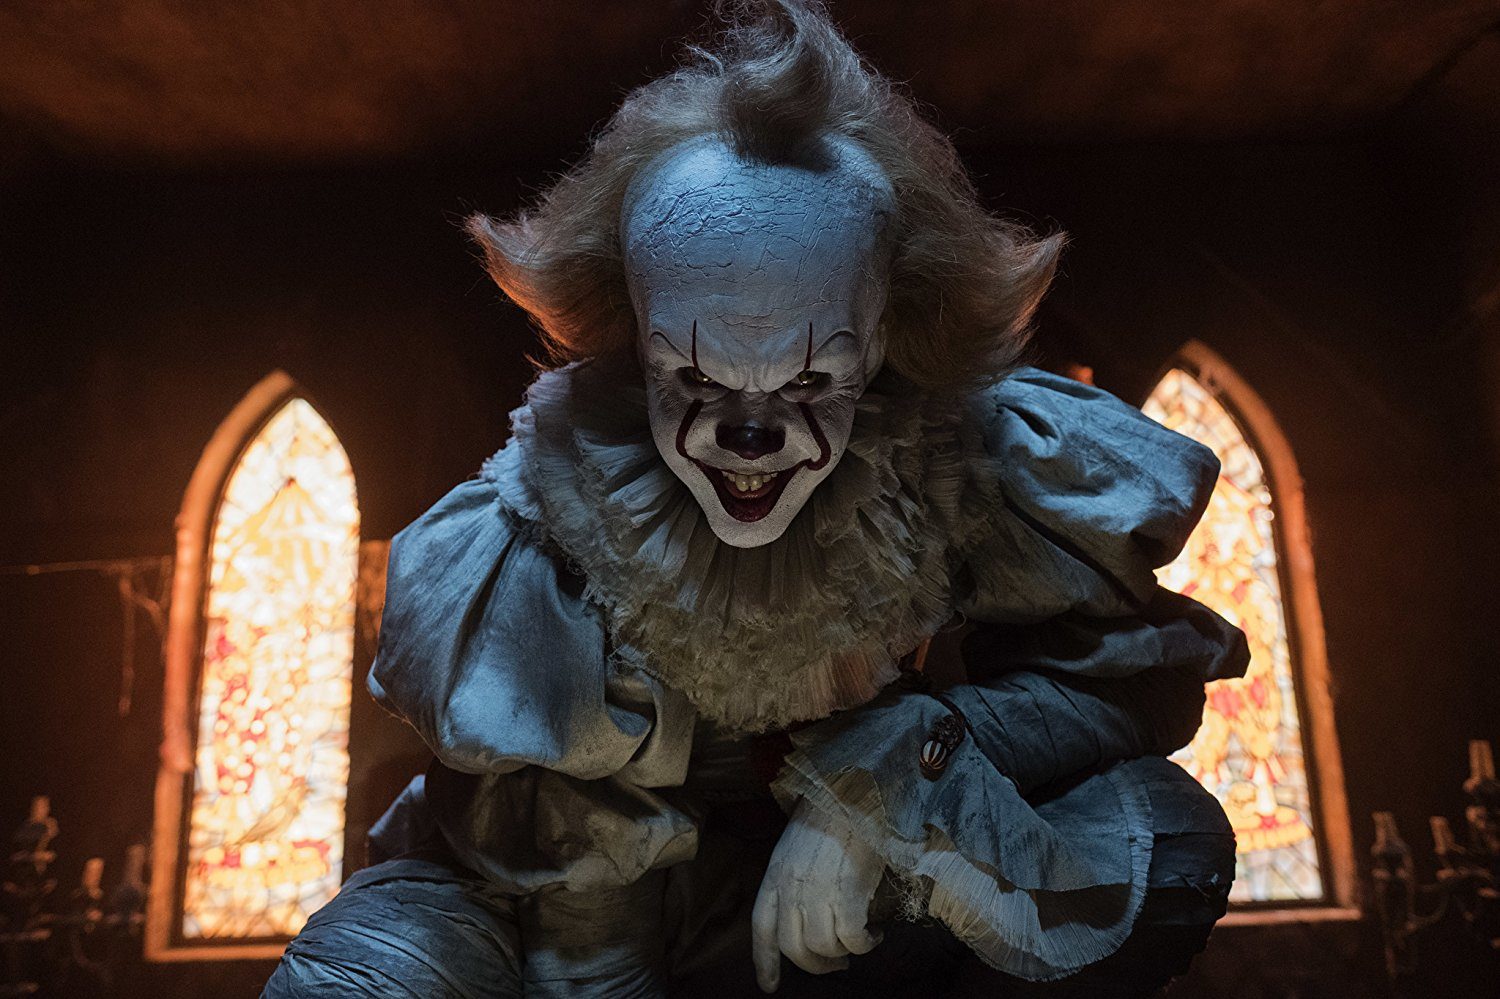 Movie Review: It (2017)